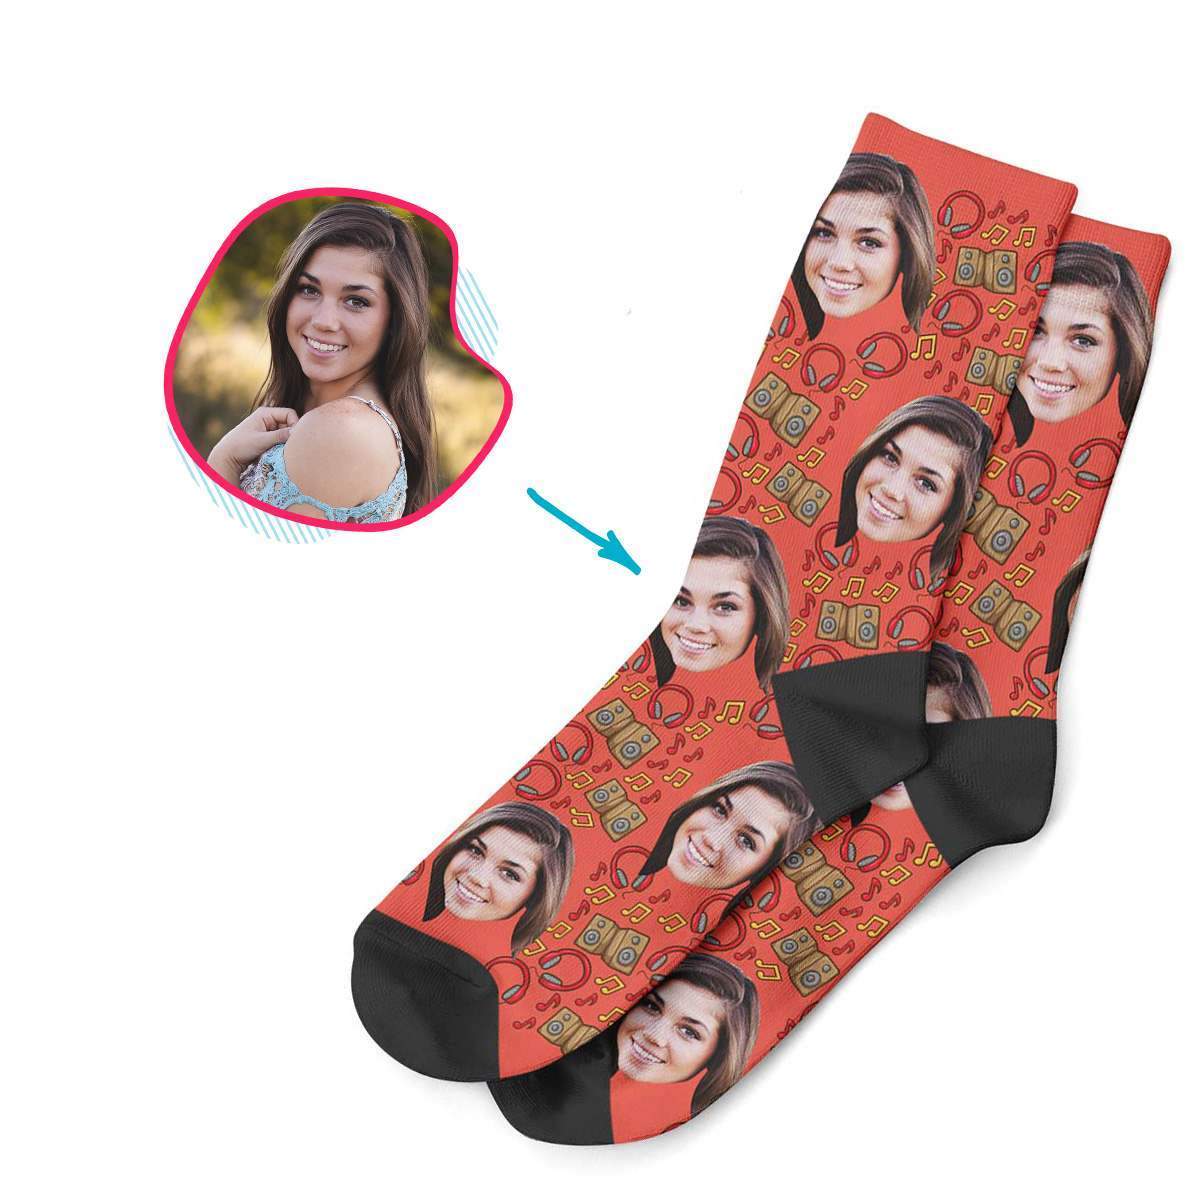 red Music socks personalized with photo of face printed on them